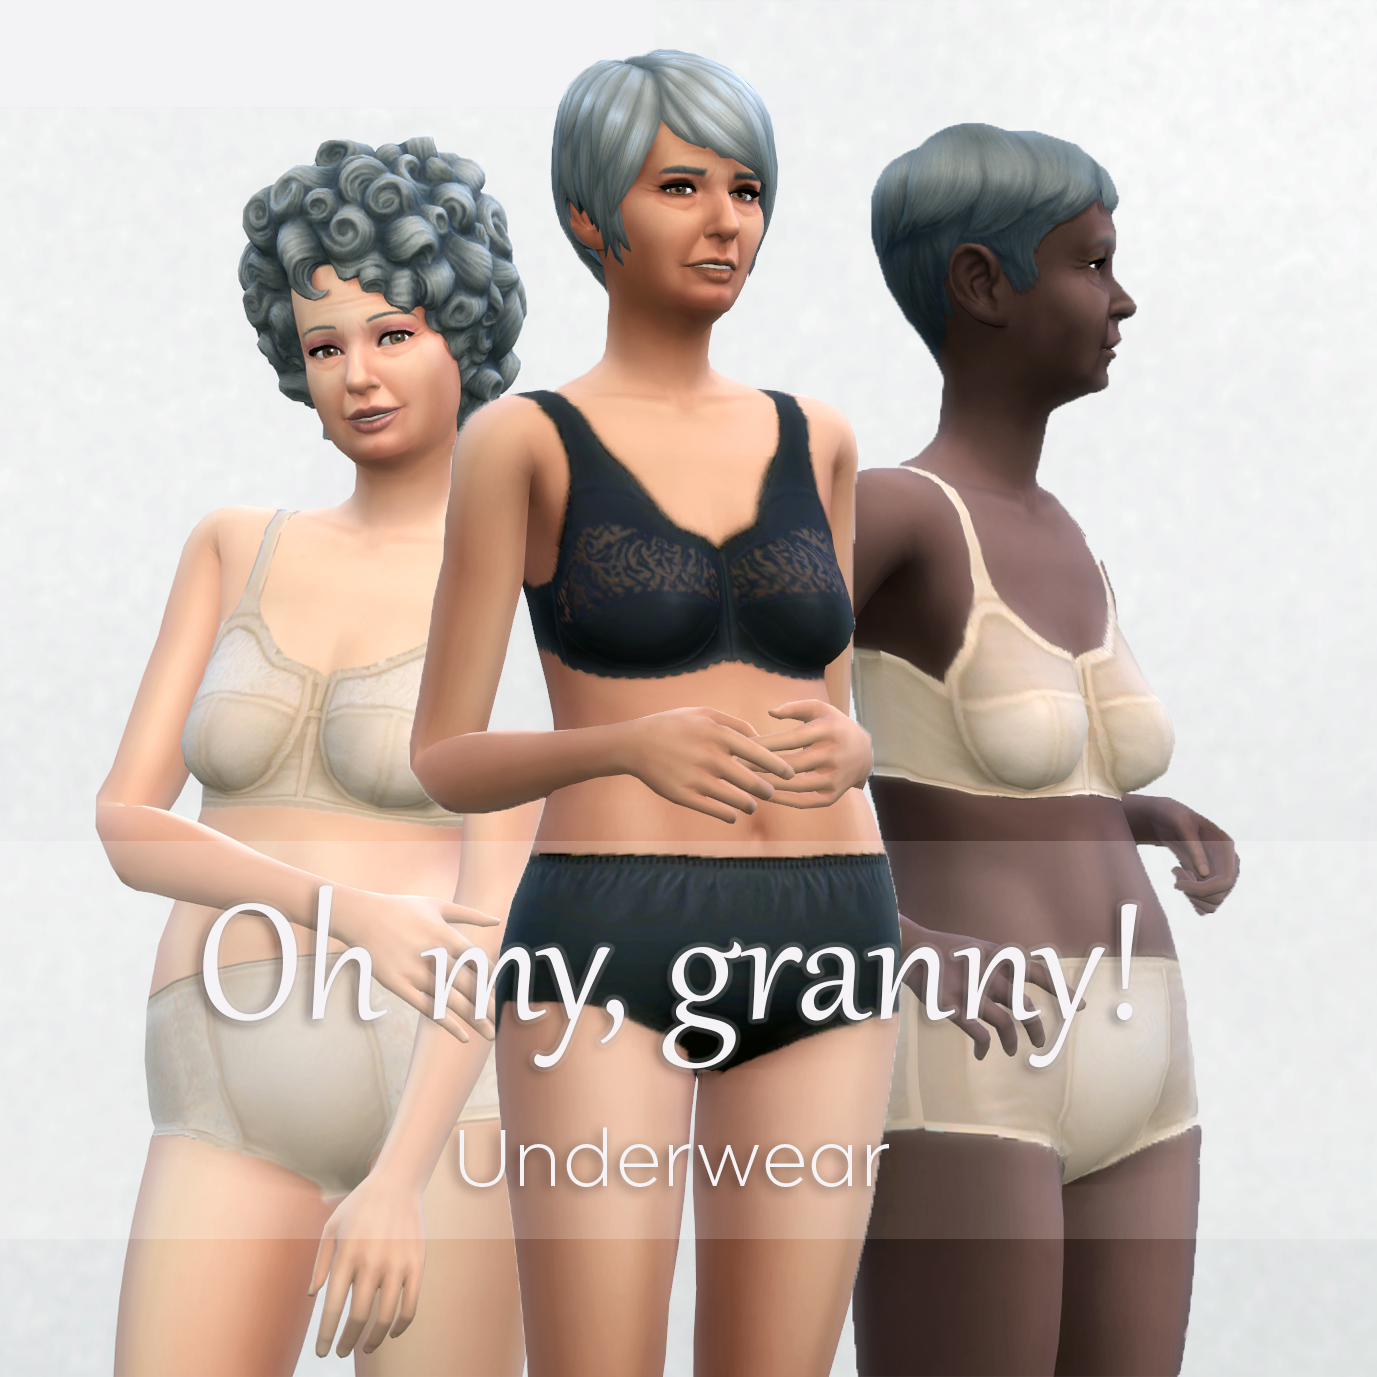 Mod The Sims - Oh My, Granny! - TS3/2 to TS4 underwear